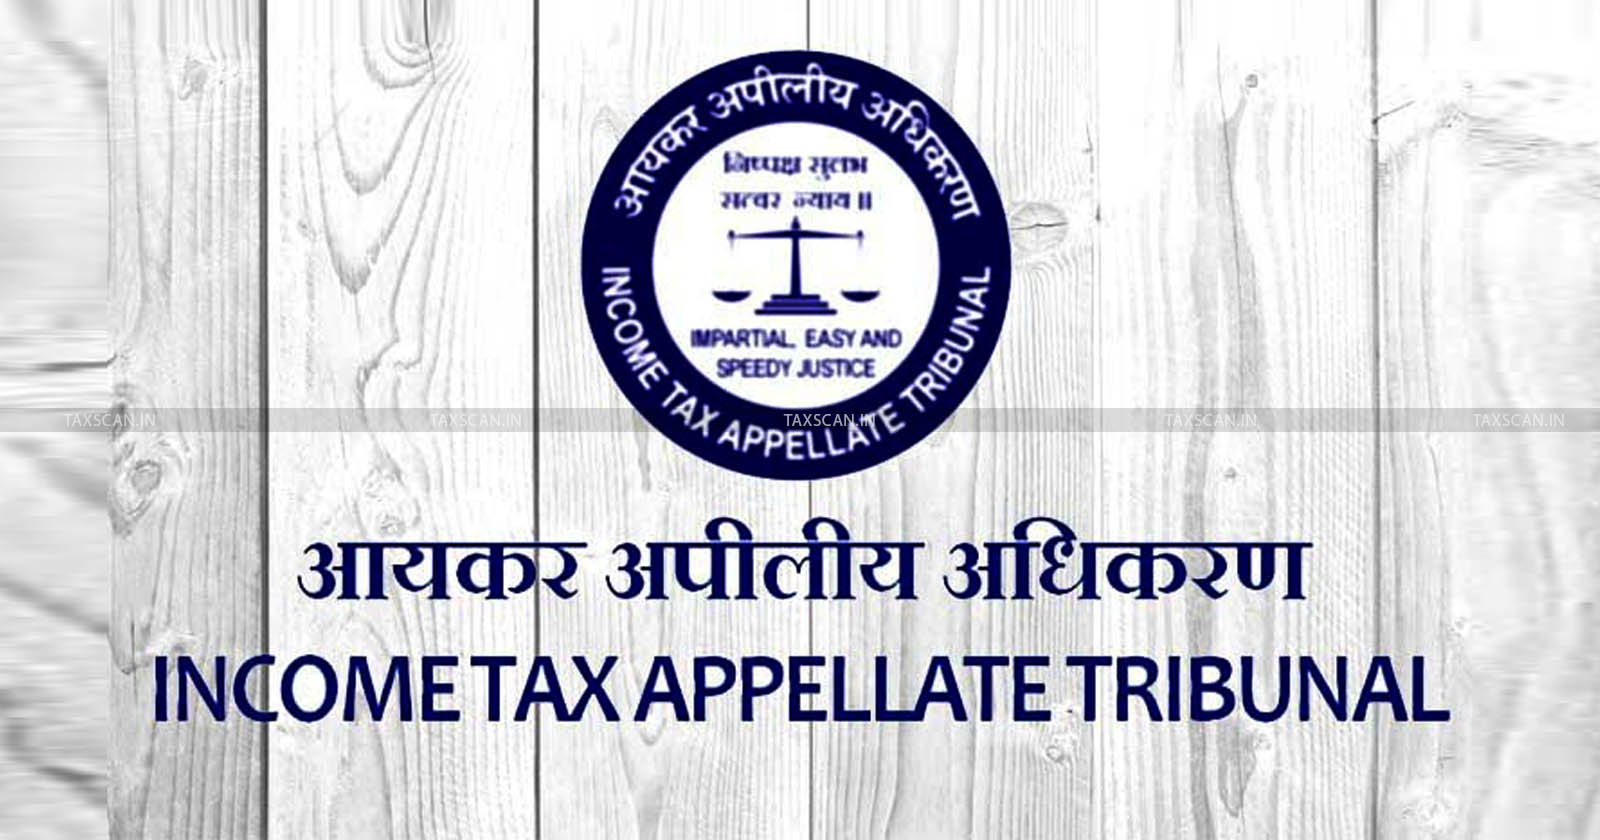 Remand of Issue to AO for Re-adjudication - PCIT - Determining Profit Declared by Assessee - Erroneous - ITAT - Income tax - Income tax act - Revision Order - under section 263 of income tax act - TAXSCAN